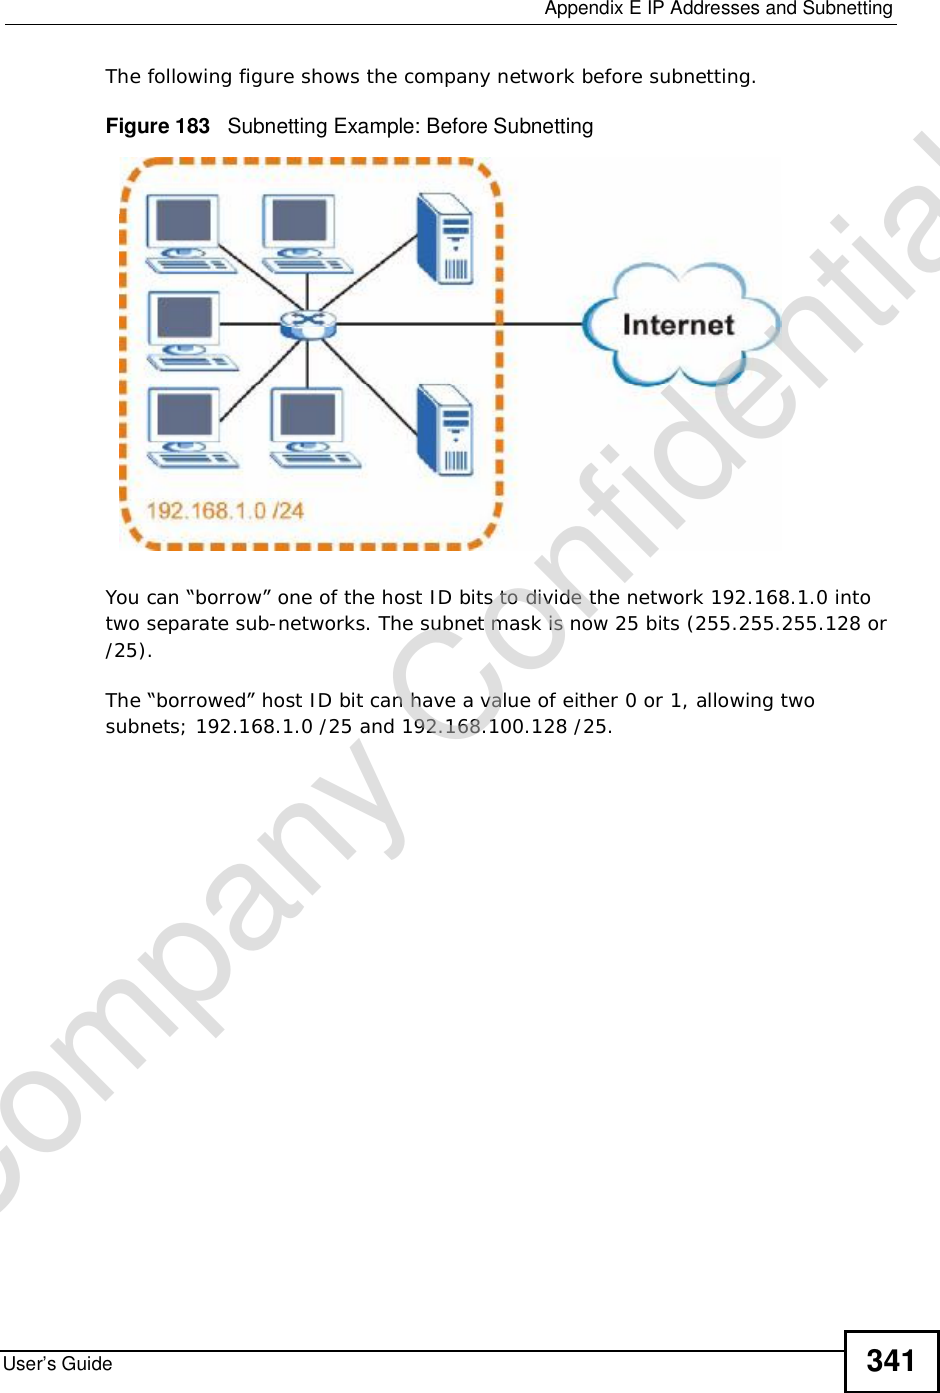  Appendix EIP Addresses and SubnettingUser’s Guide 341The following figure shows the company network before subnetting.  Figure 183   Subnetting Example: Before SubnettingYou can “borrow” one of the host ID bits to divide the network 192.168.1.0 into two separate sub-networks. The subnet mask is now 25 bits (255.255.255.128 or /25).The “borrowed” host ID bit can have a value of either 0 or 1, allowing two subnets; 192.168.1.0 /25 and 192.168.100.128 /25. Company Confidential